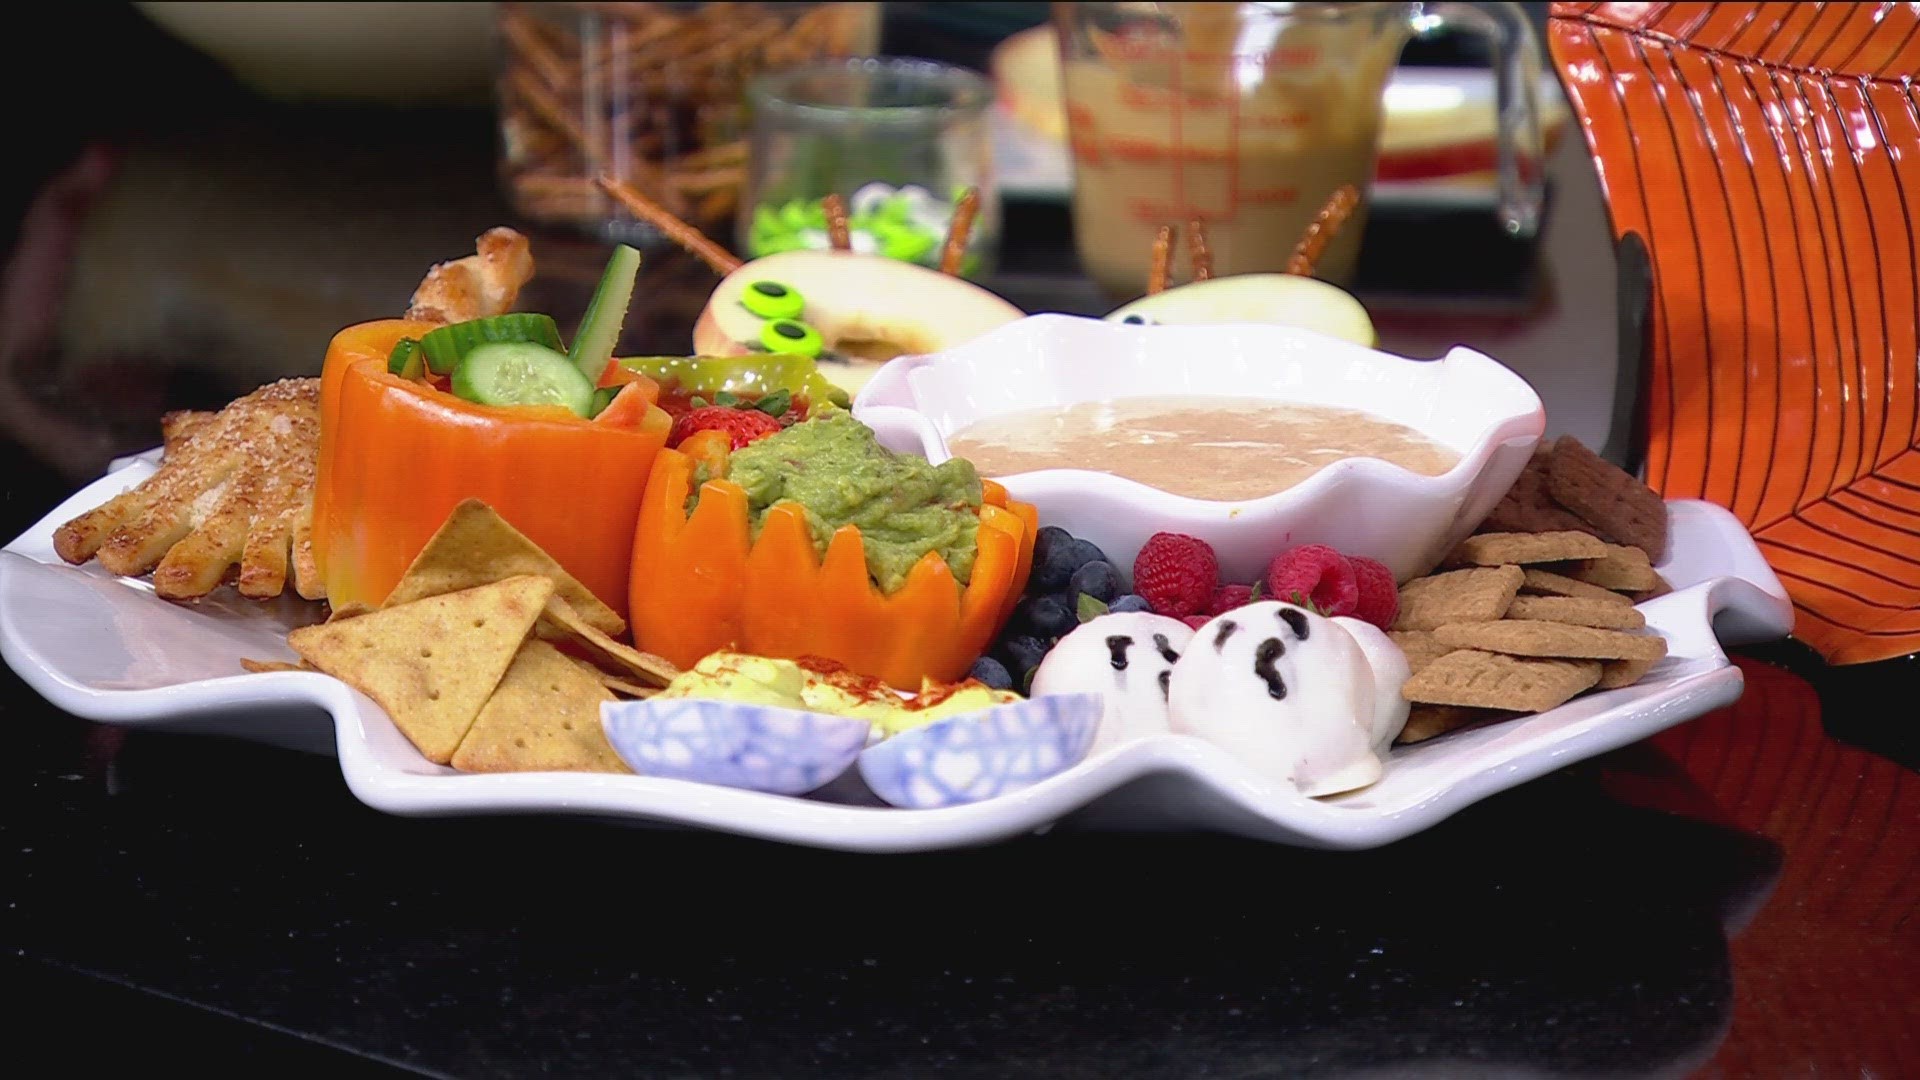 Step up your charcuterie game for Halloween with some spooky seasonal treats.